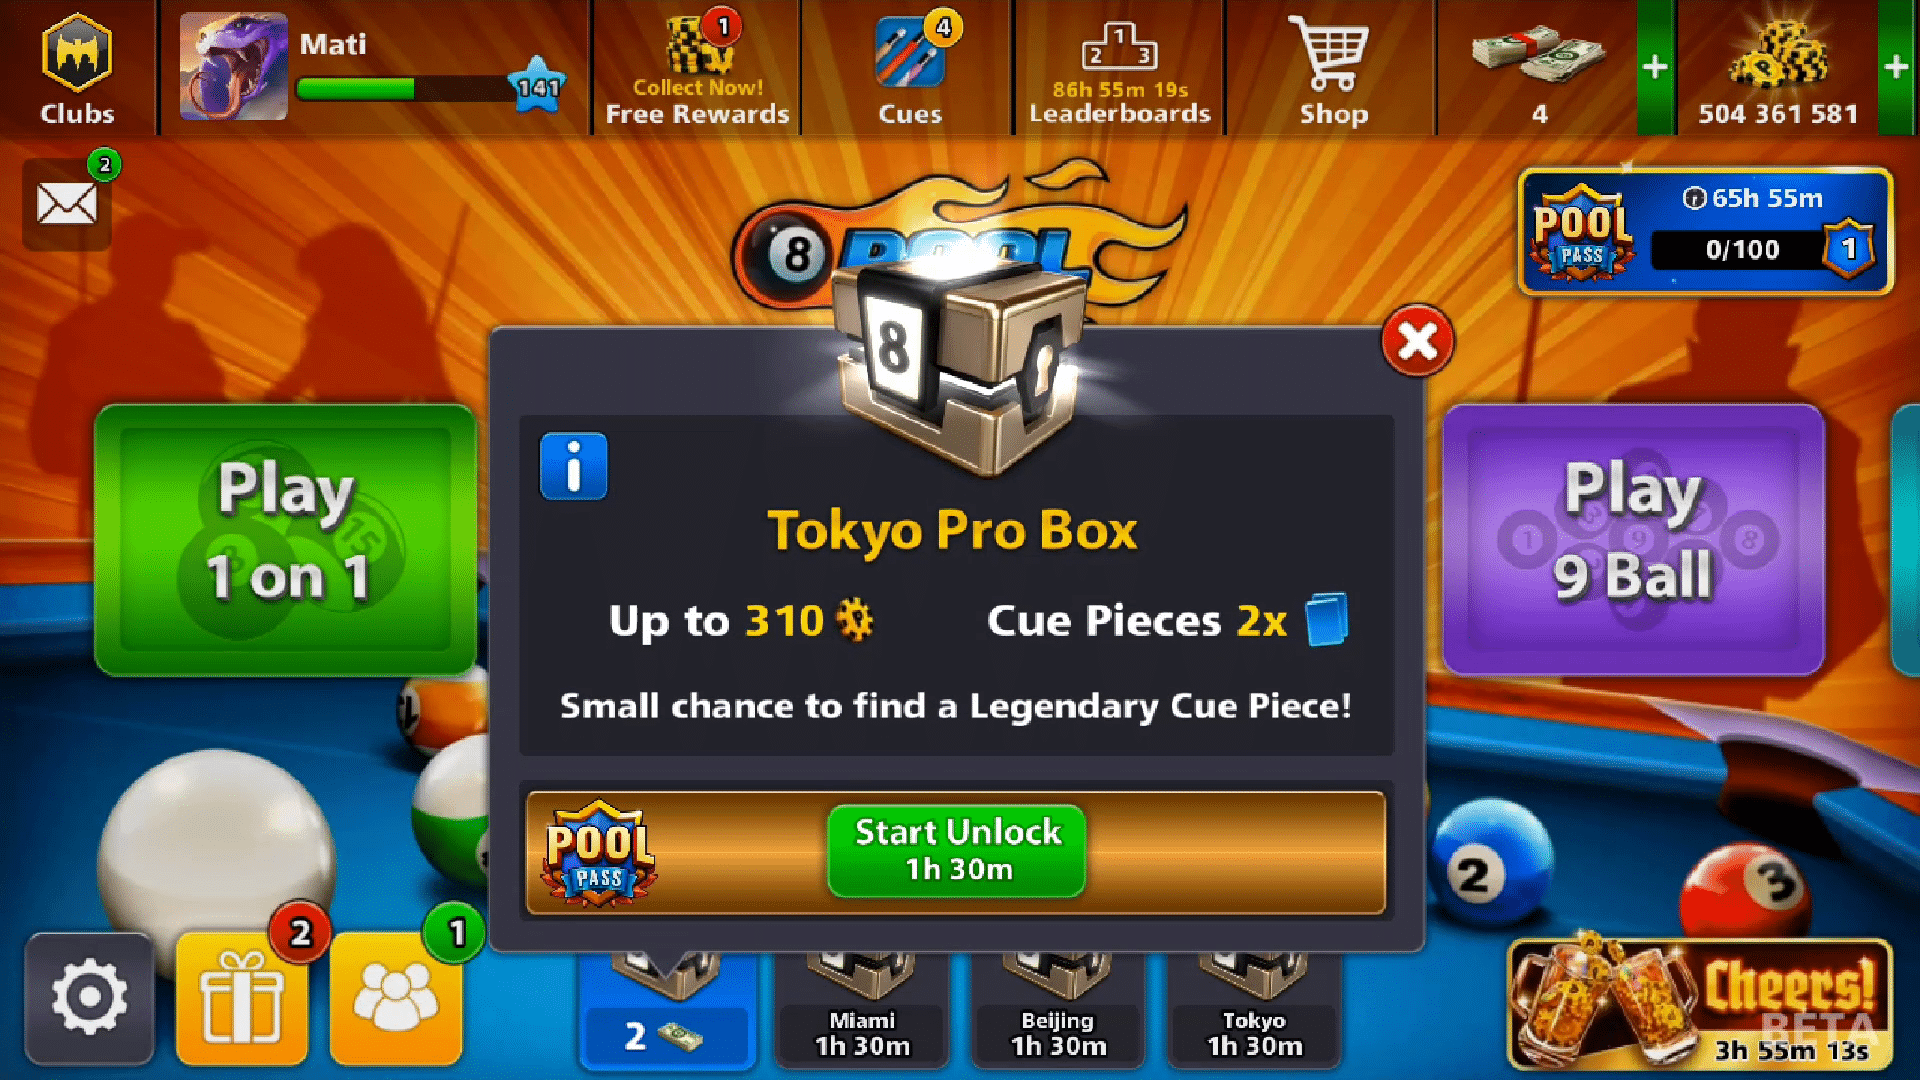 Faster Victory Boxes